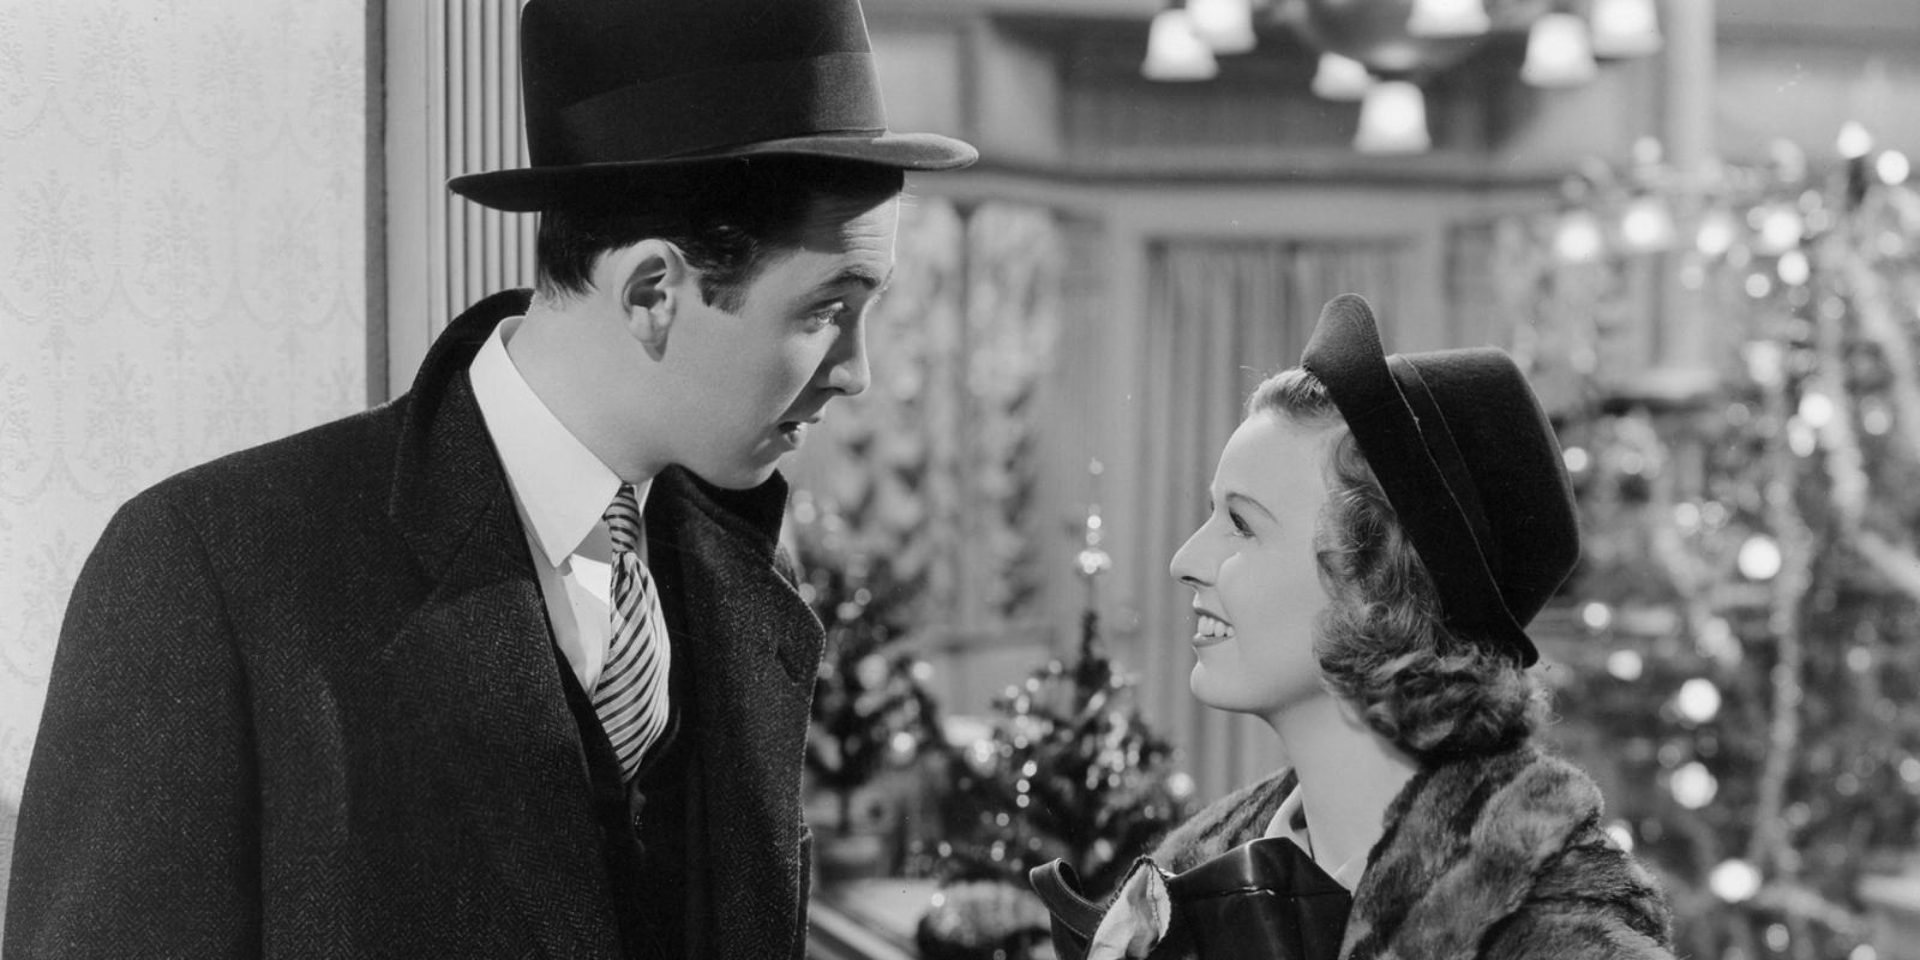 Ernst Lubitsch Cycle, The Magician of Comedy. Screening: 'The Shop around the corner'